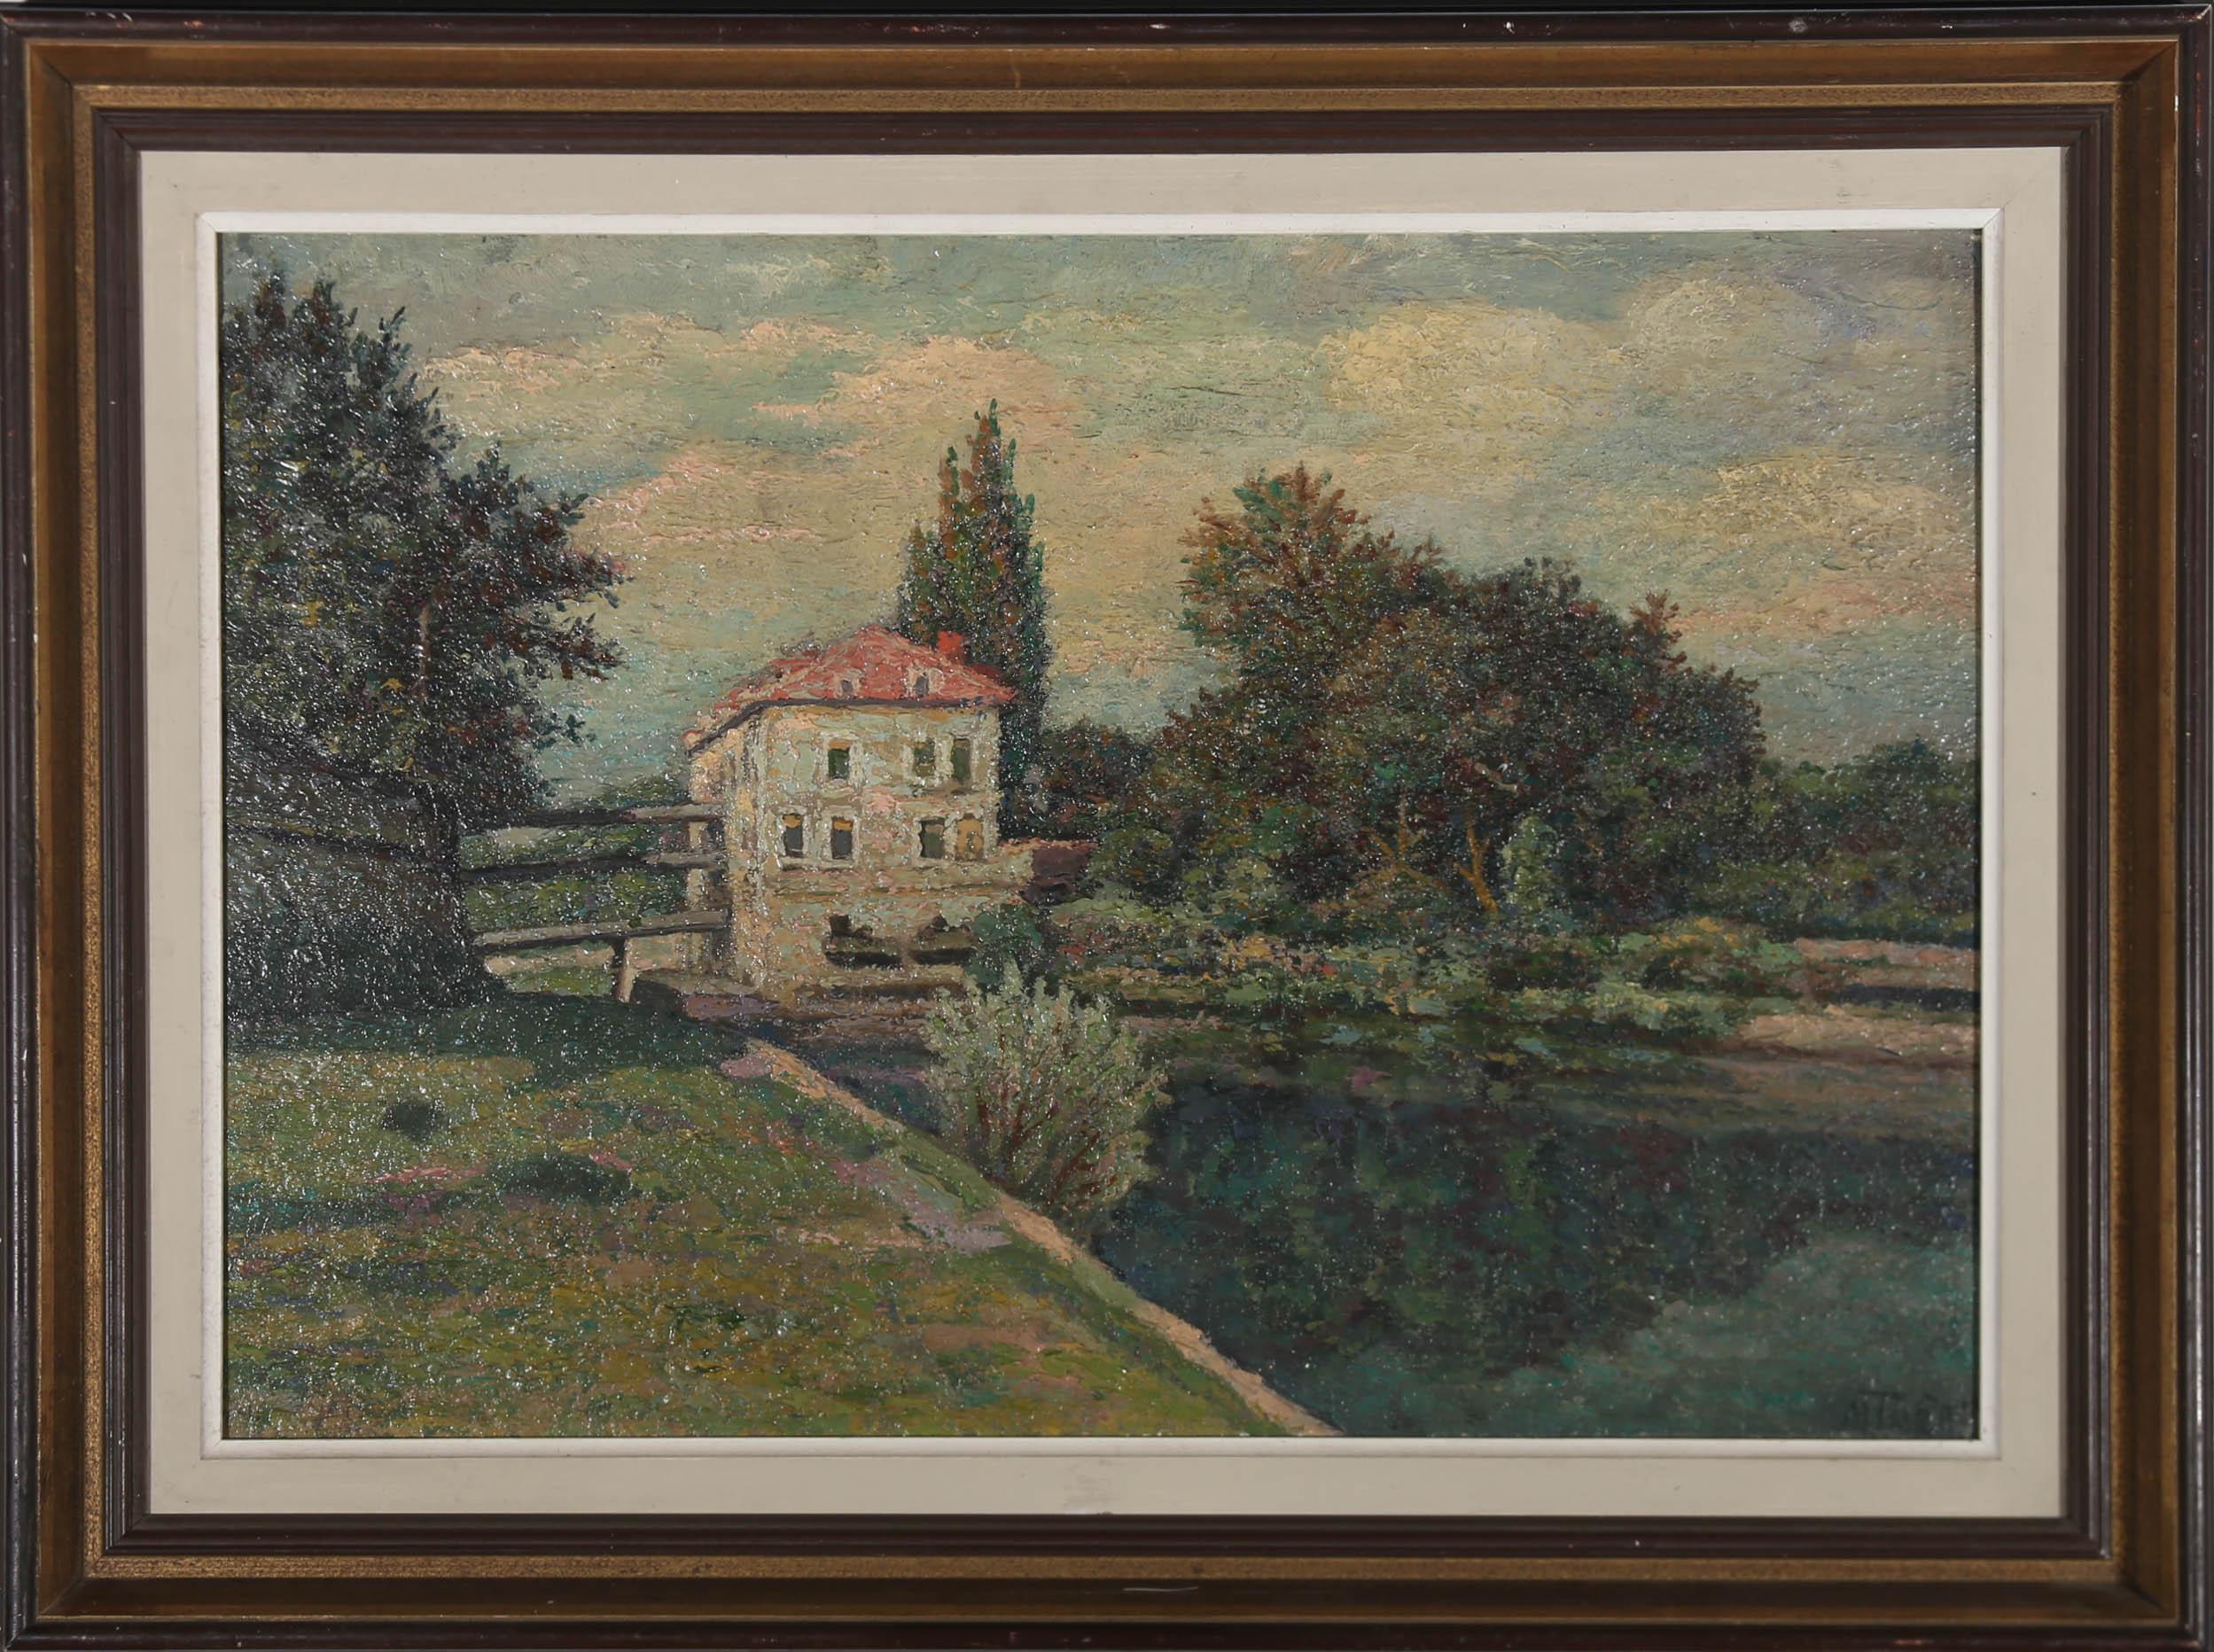 Unknown Landscape Painting - 20th Century Oil - House On The River